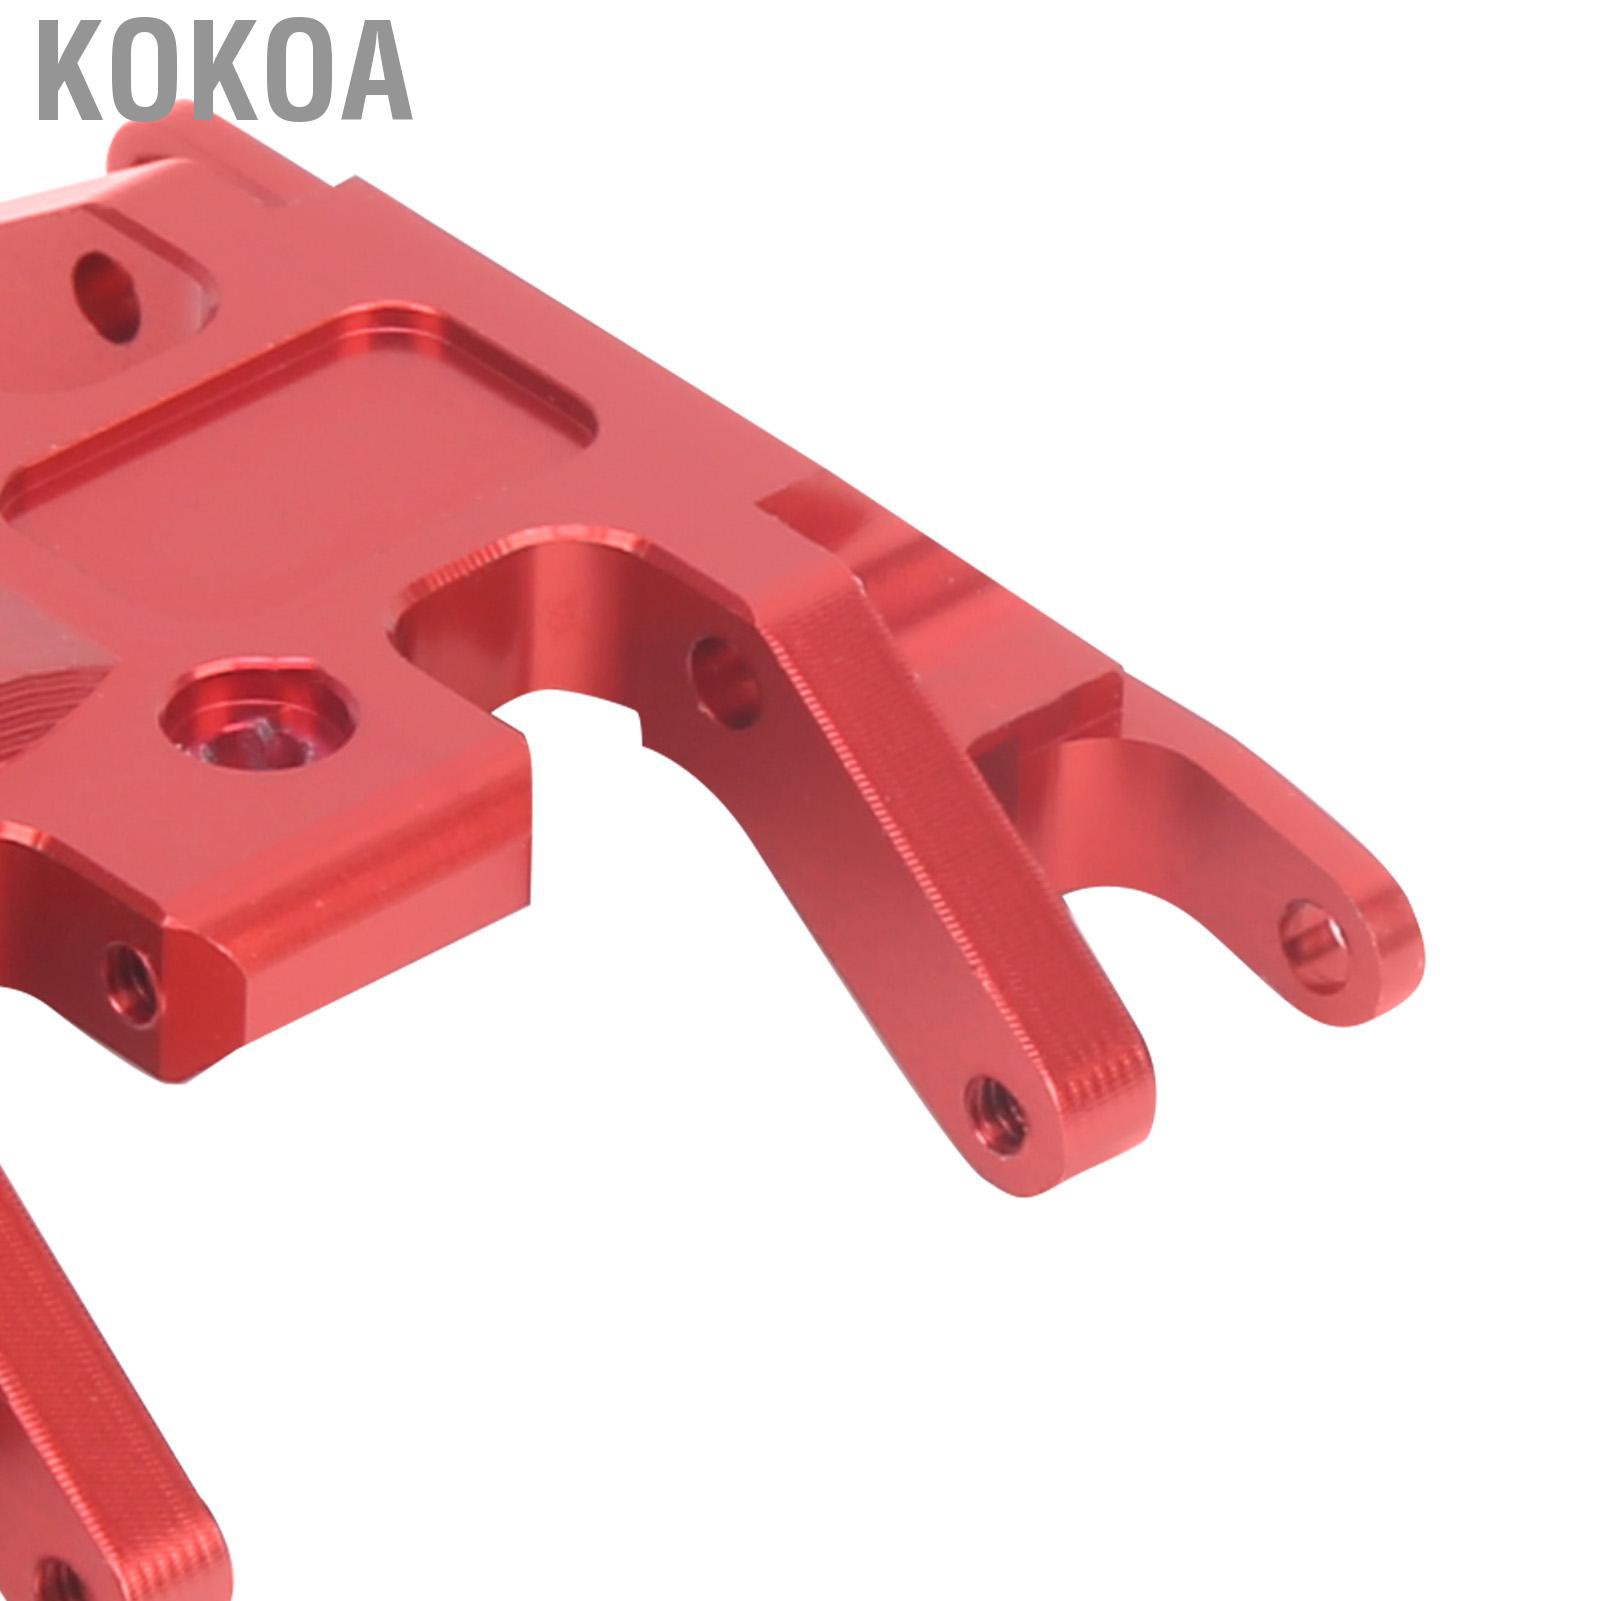 Kokoa RC Gearbox Mount Aluminum Alloy Box Chassis Base Plate Holder for Axial SCX24 90081 1/24 Car